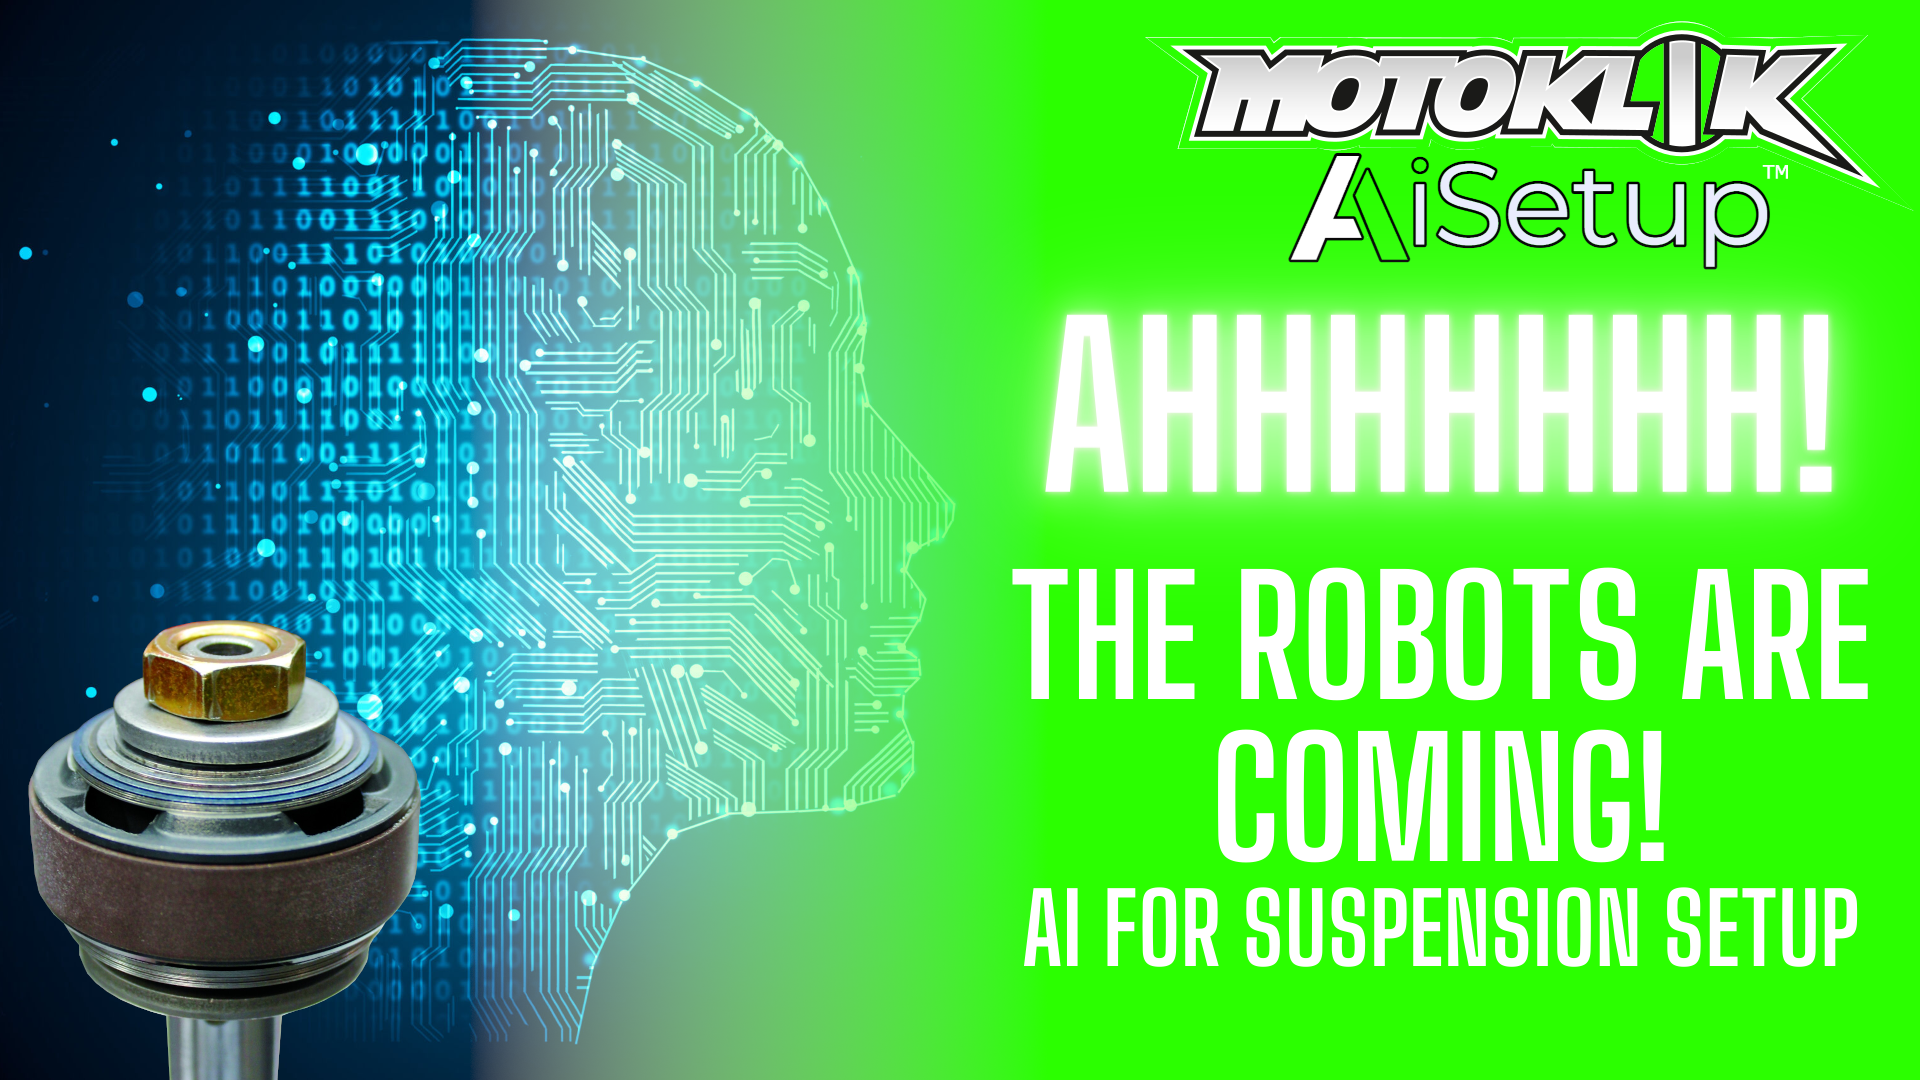 Ahhhh the robots are coming! AI for Suspension Setup